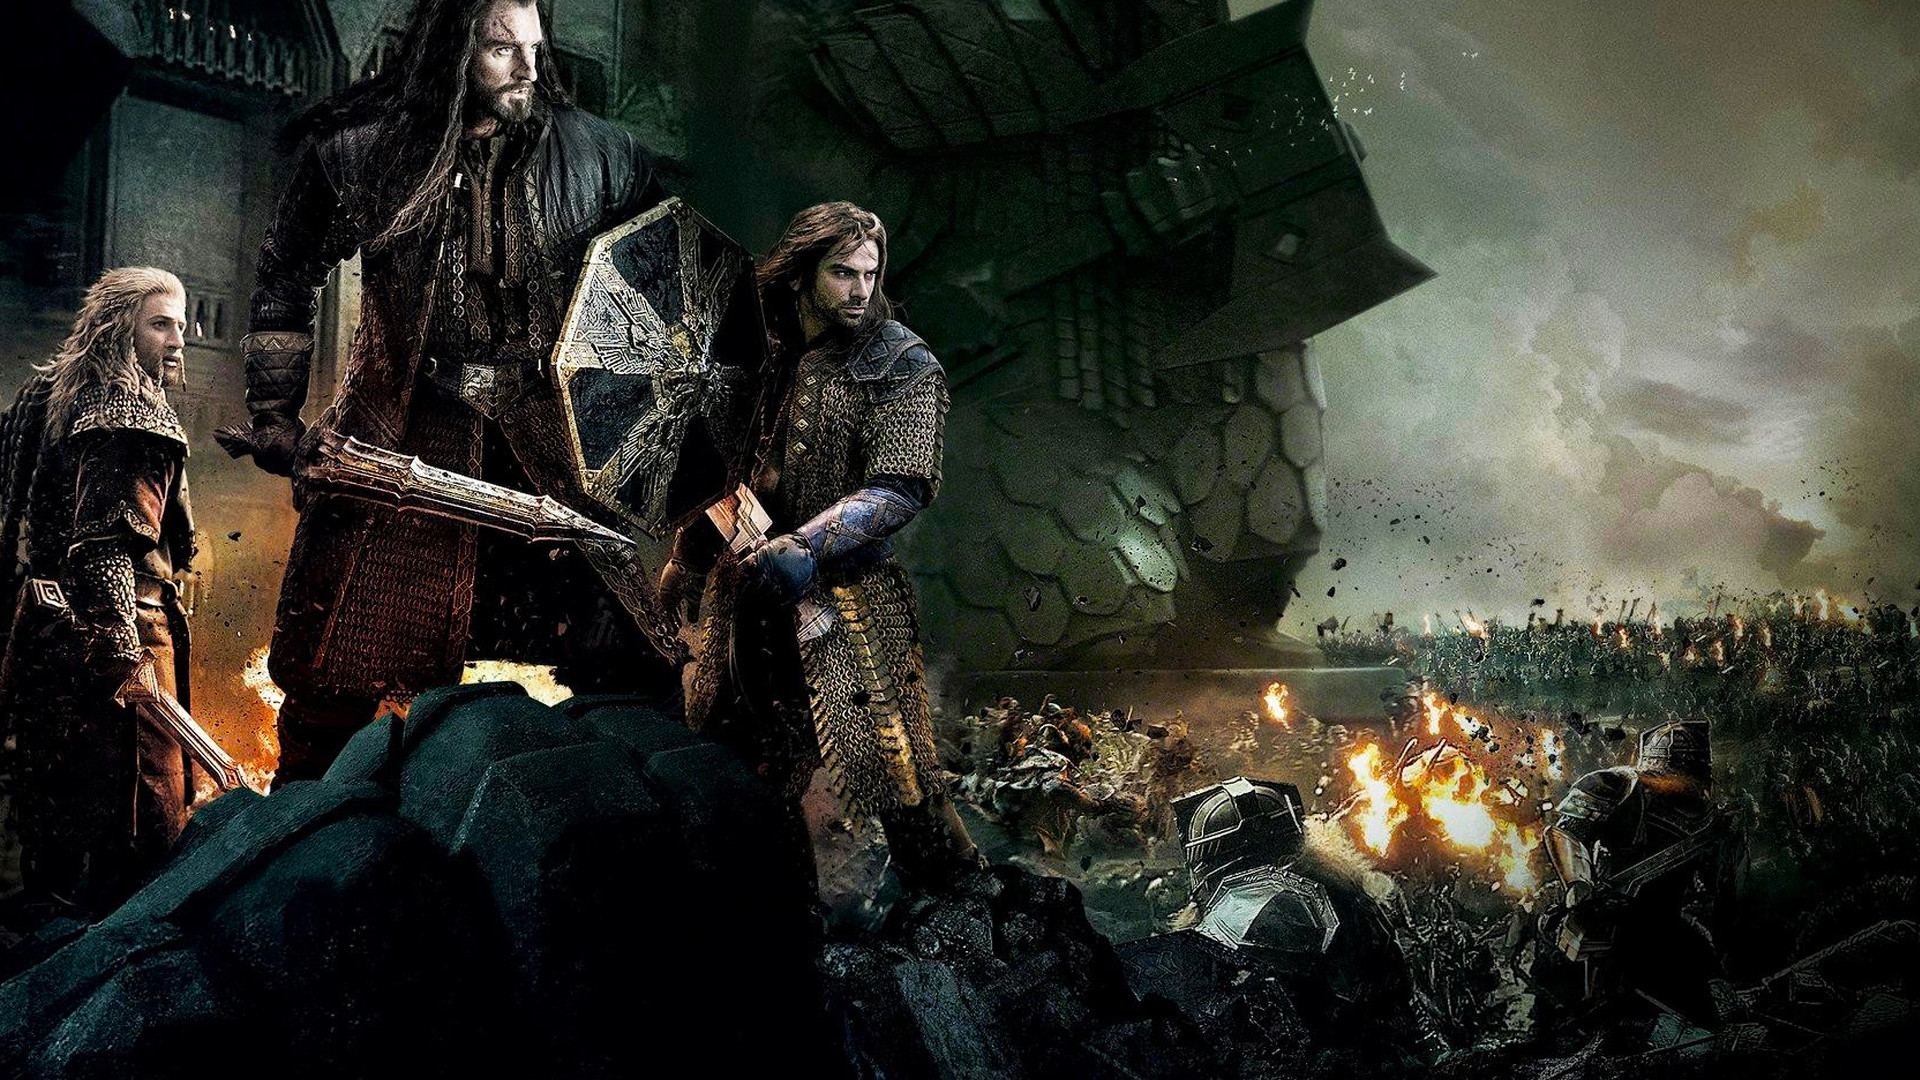 … The Hobbit: Battle of the Five Armies Wallpaper by sachso74